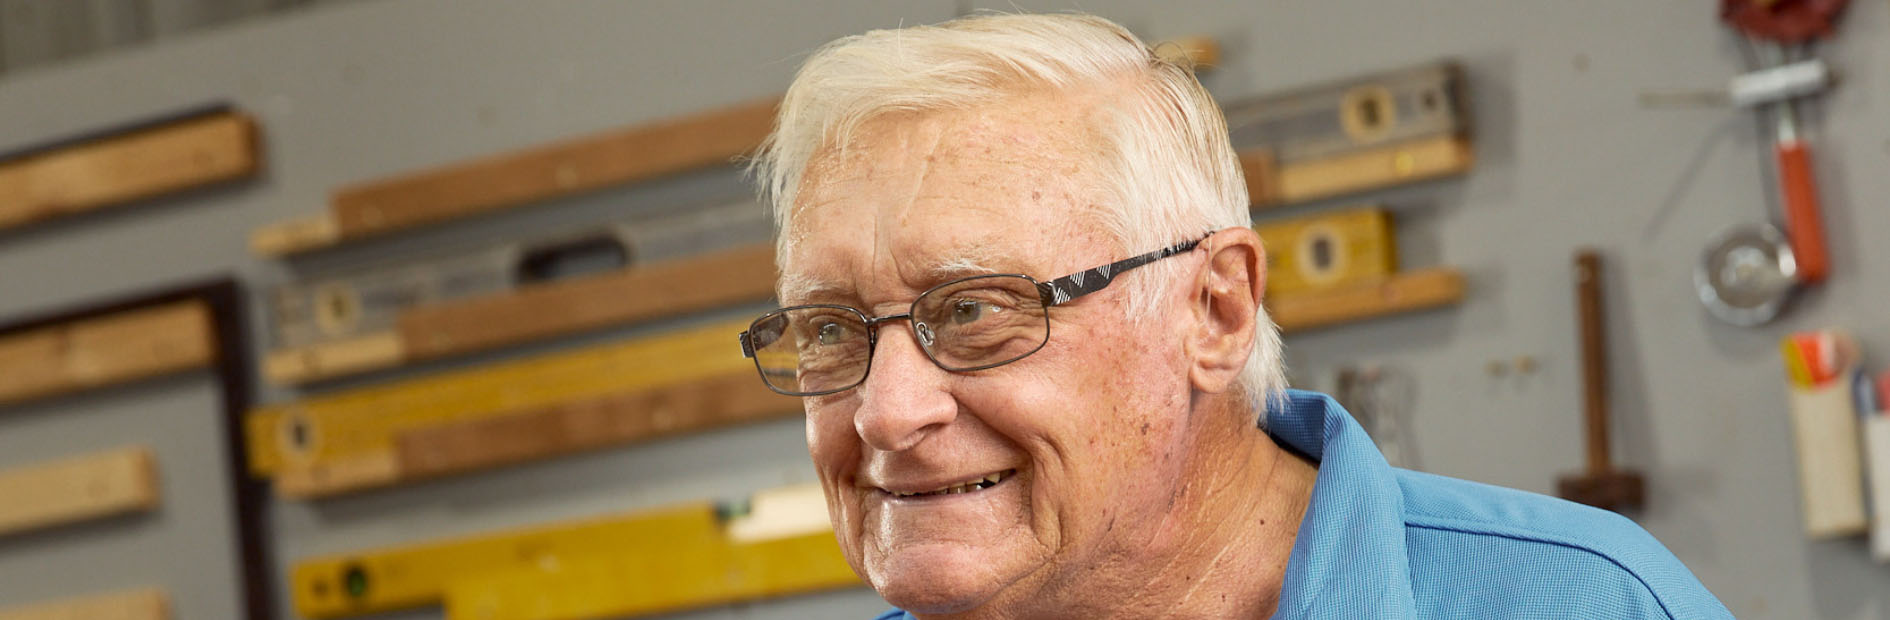 Elderly man wearing glasses and dressed in a blue polo shirt smiles